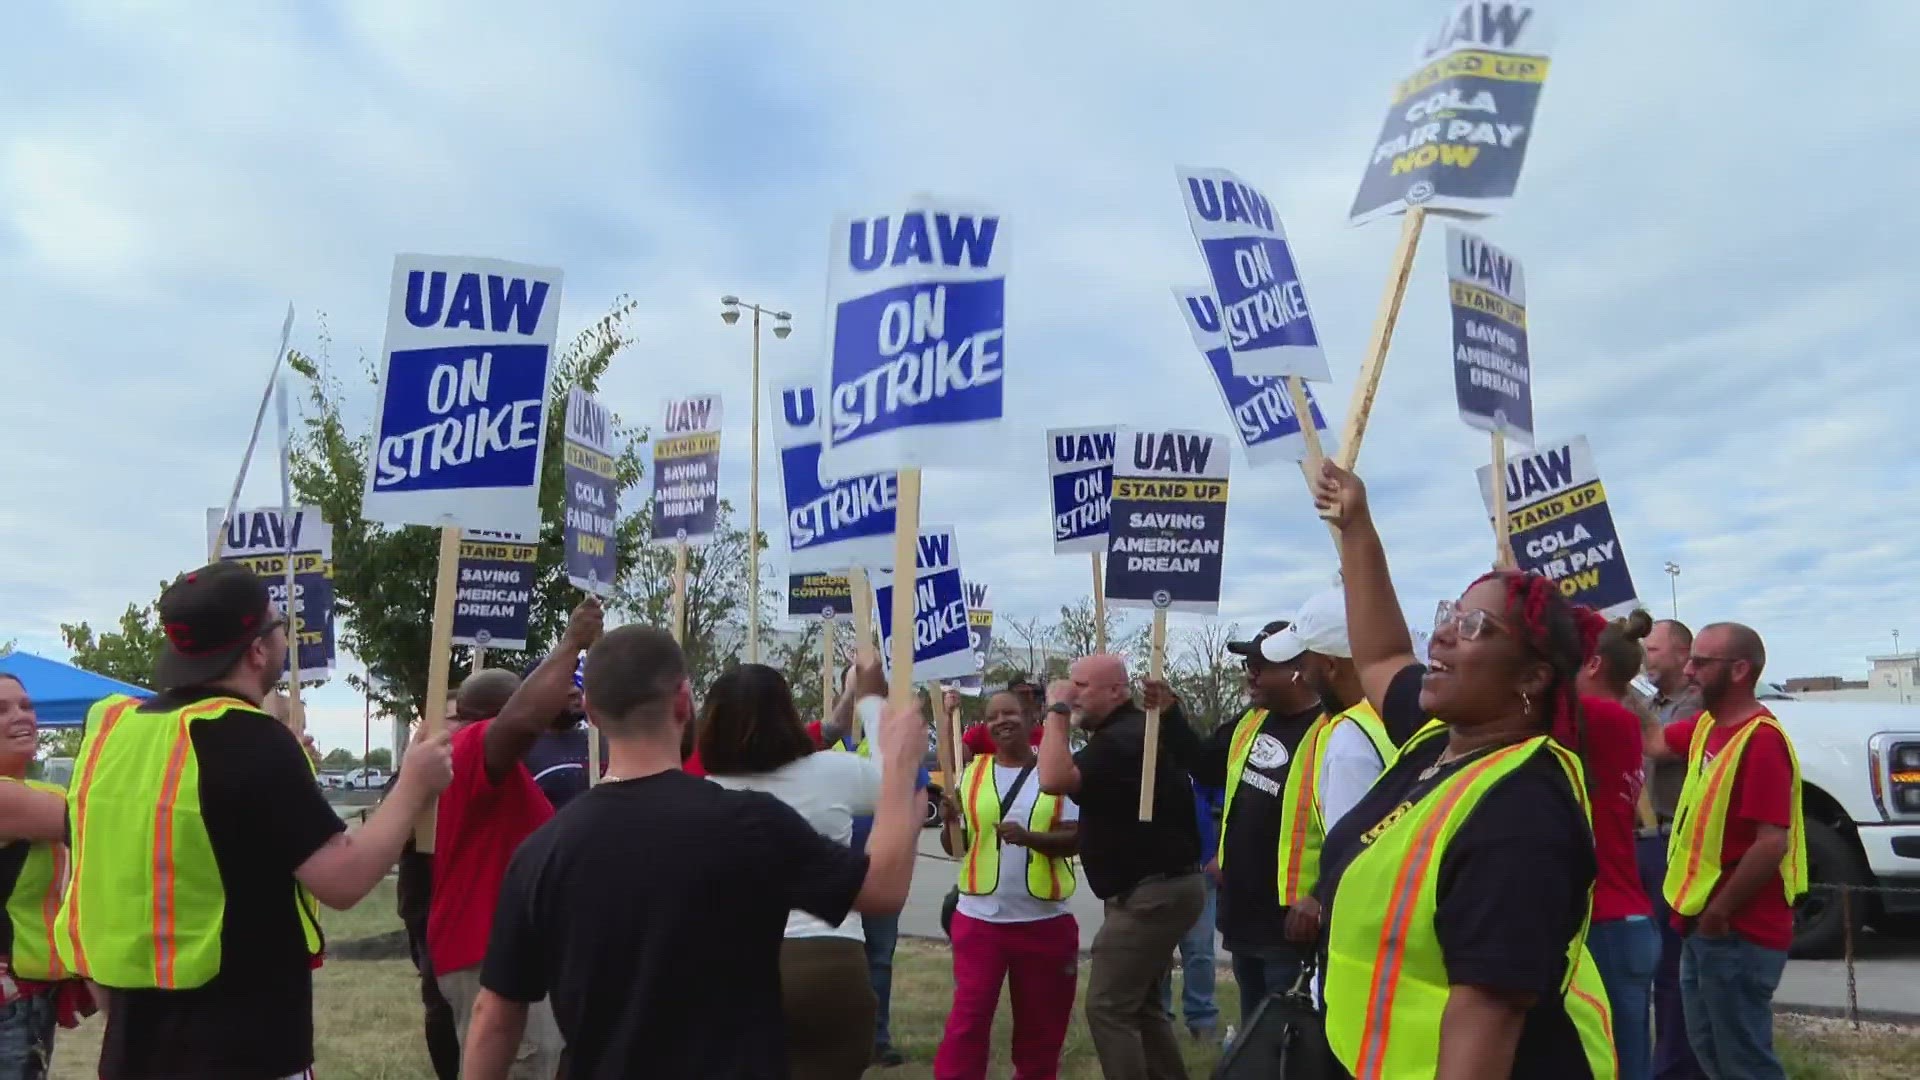 Ford's top executive says that last fall’s contentious UAW strike changed the company's relationship with the union.